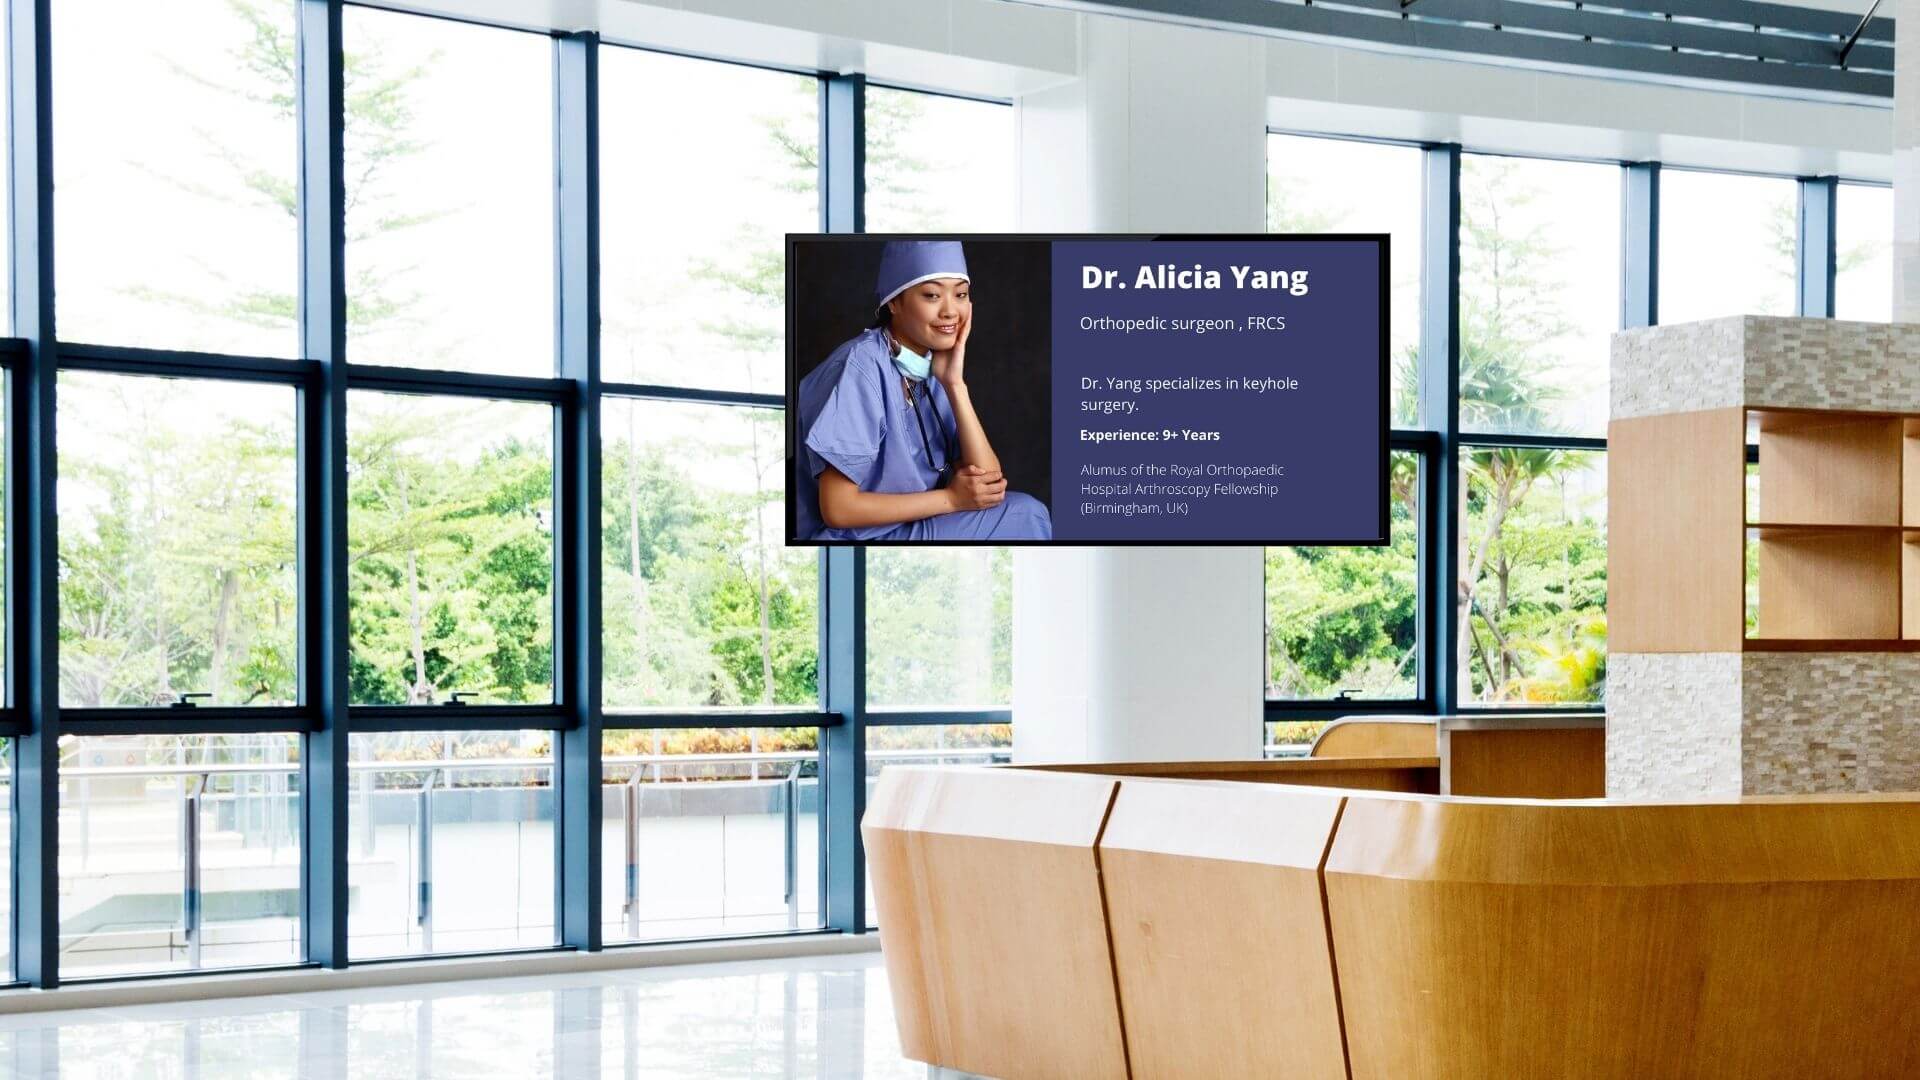 A hospital reception shows a doctor&rsquo;s profile on digital signage